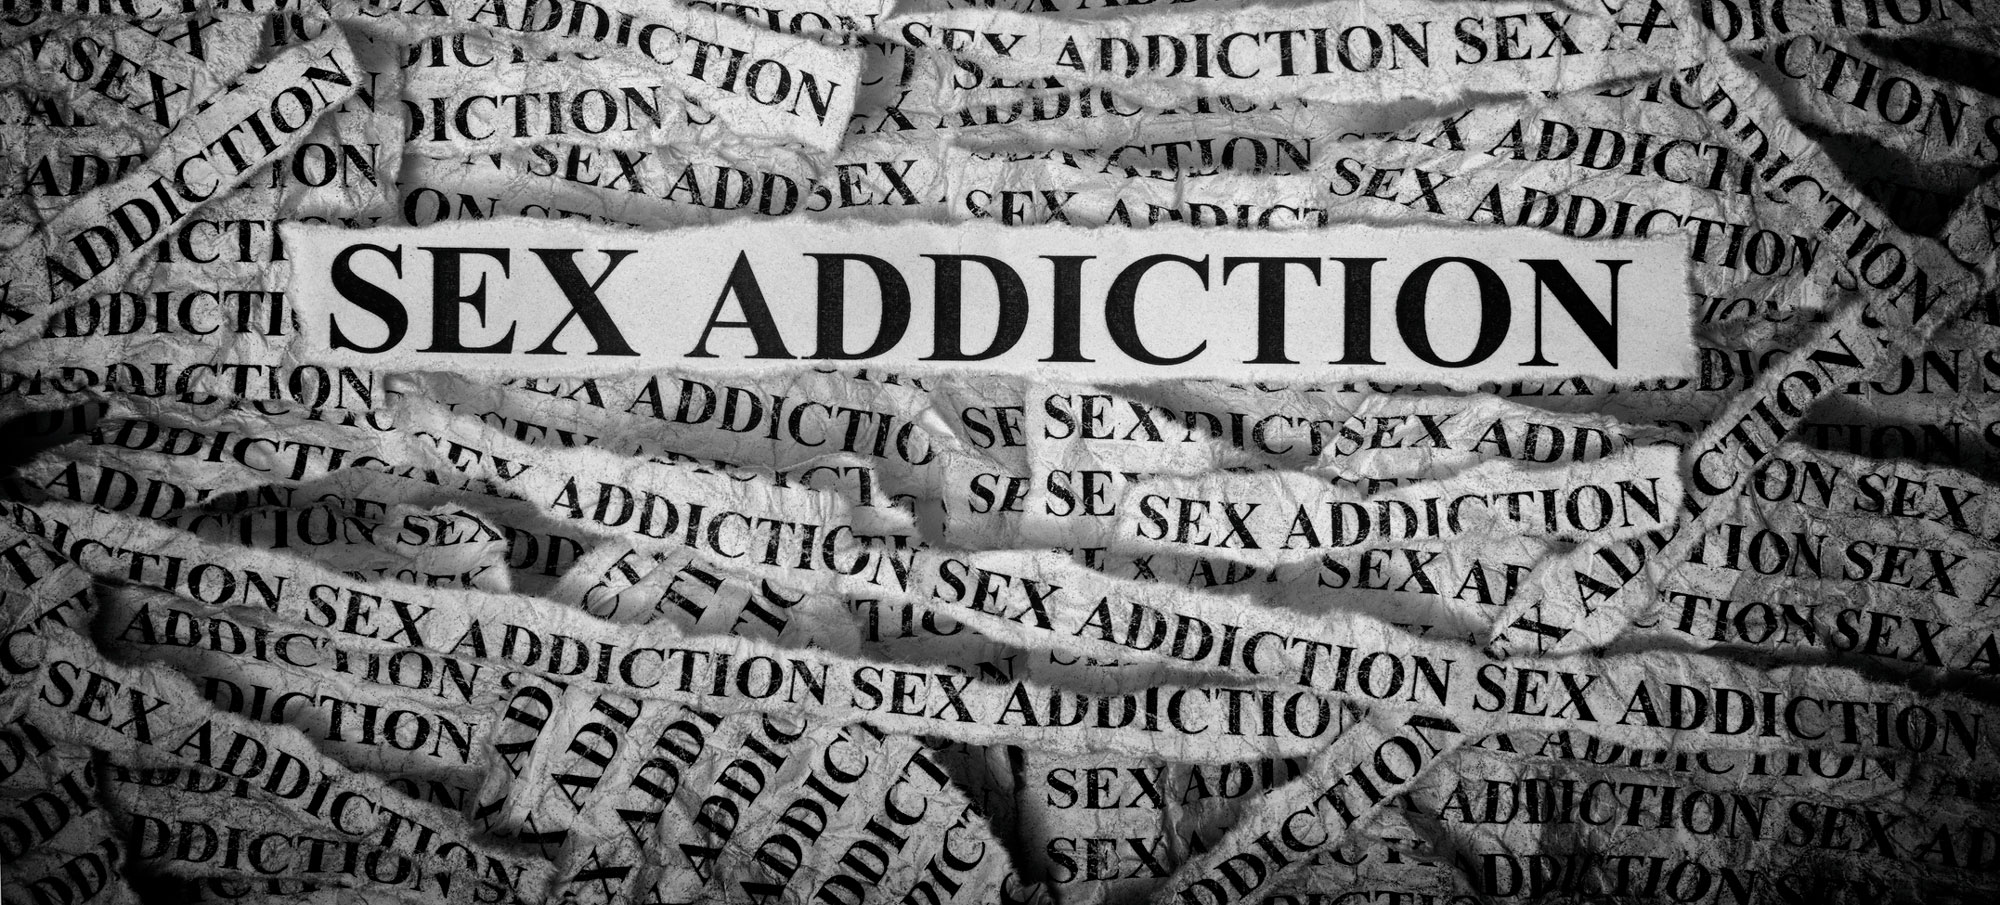 Signs That You Need Help for Sex Addiction The Meadows pic pic